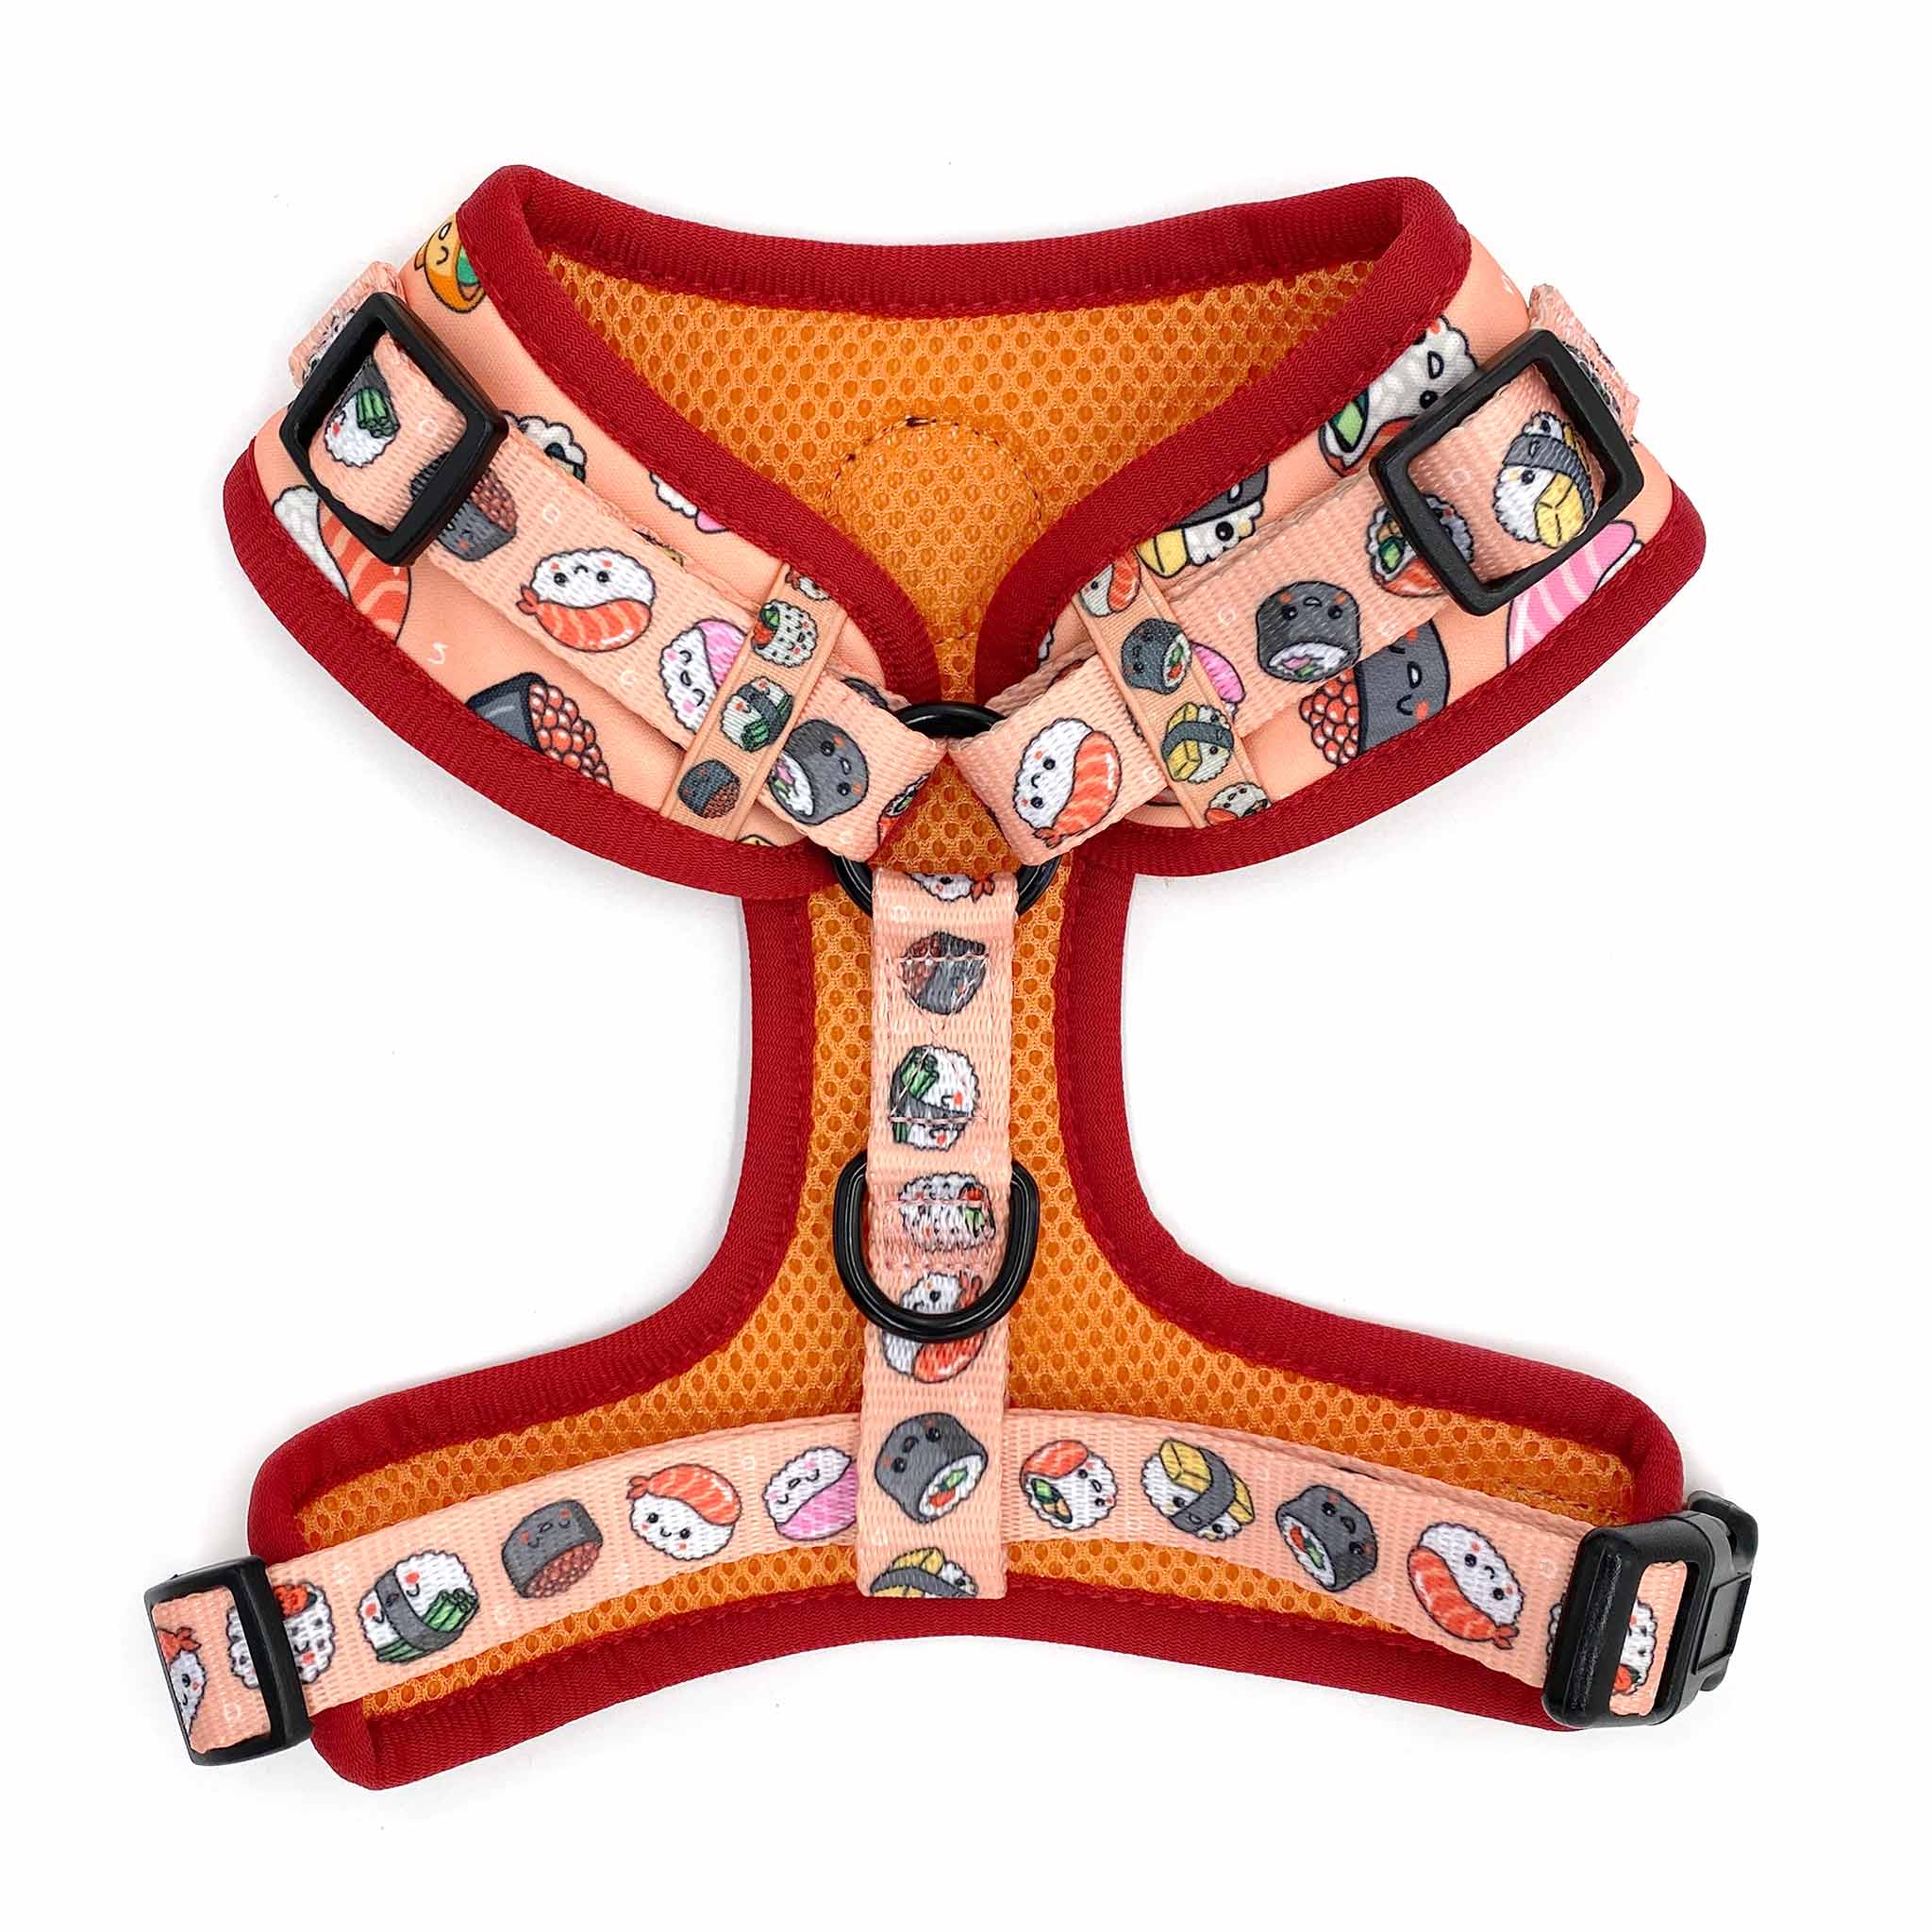 Back view of Pipco Pets adjustable dog harness with Sushi Train print pattern in pink